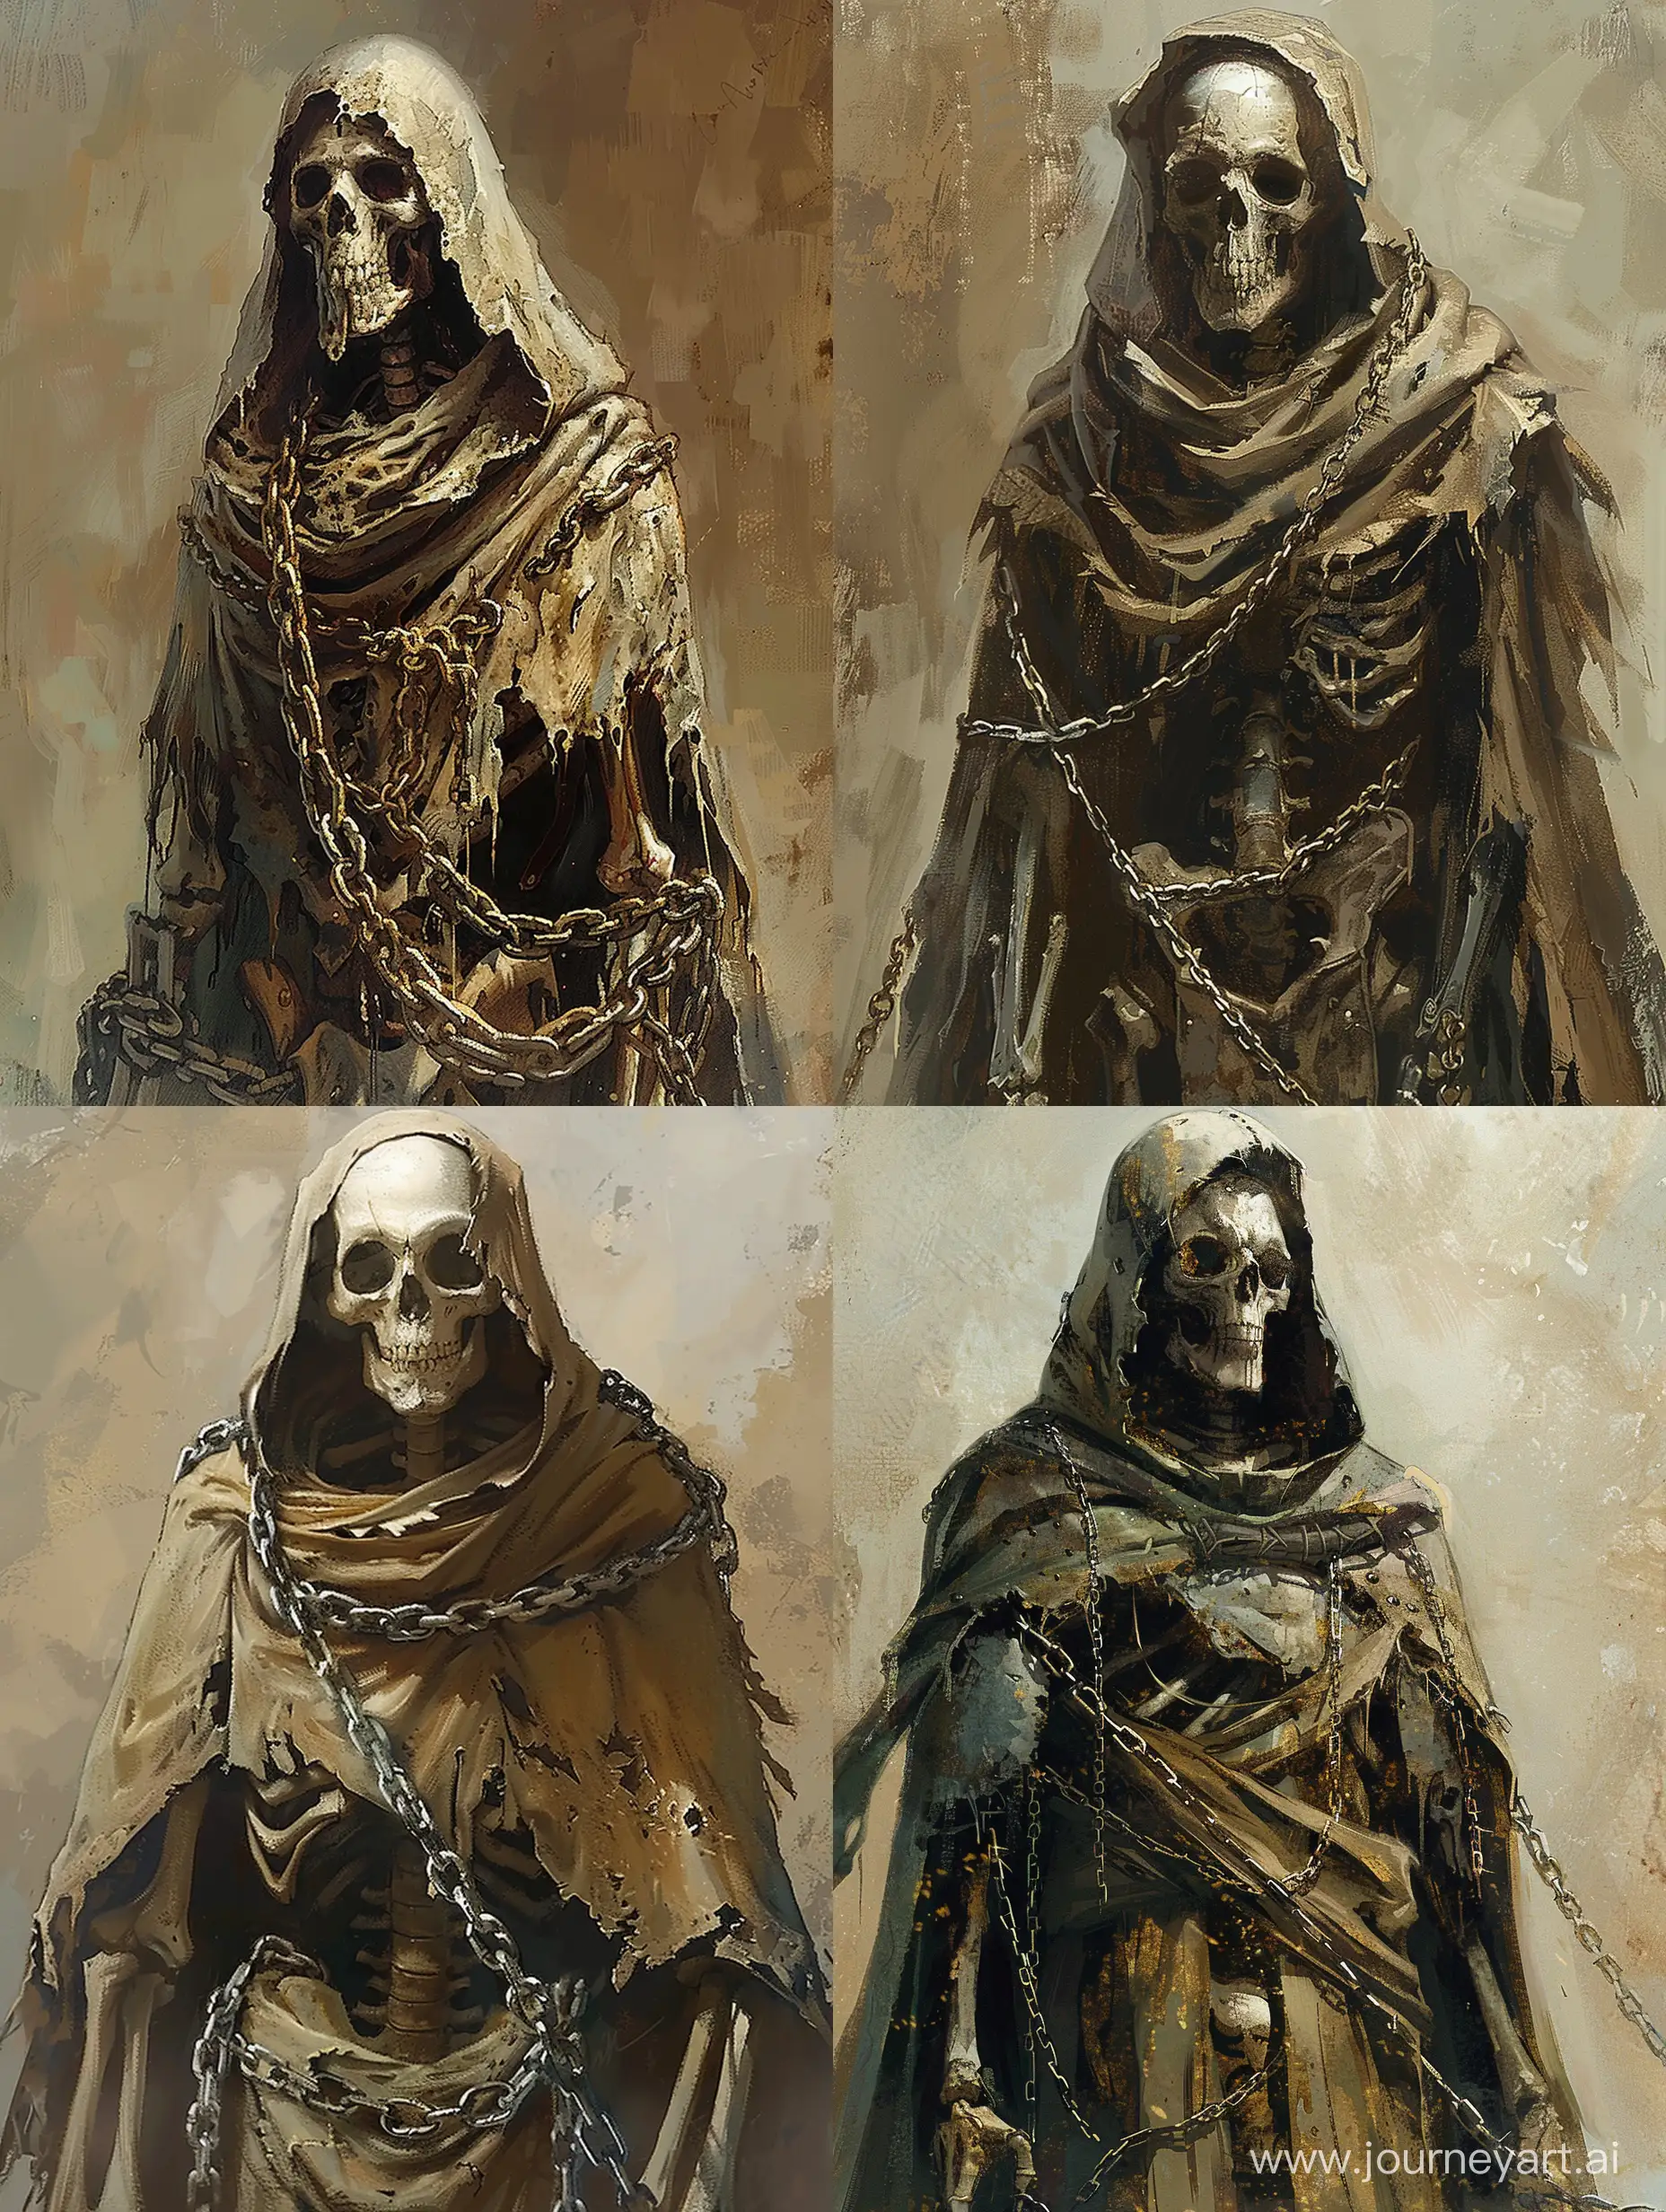 Ethereal-Skeletal-Figure-in-Tattered-Robes-and-Chains